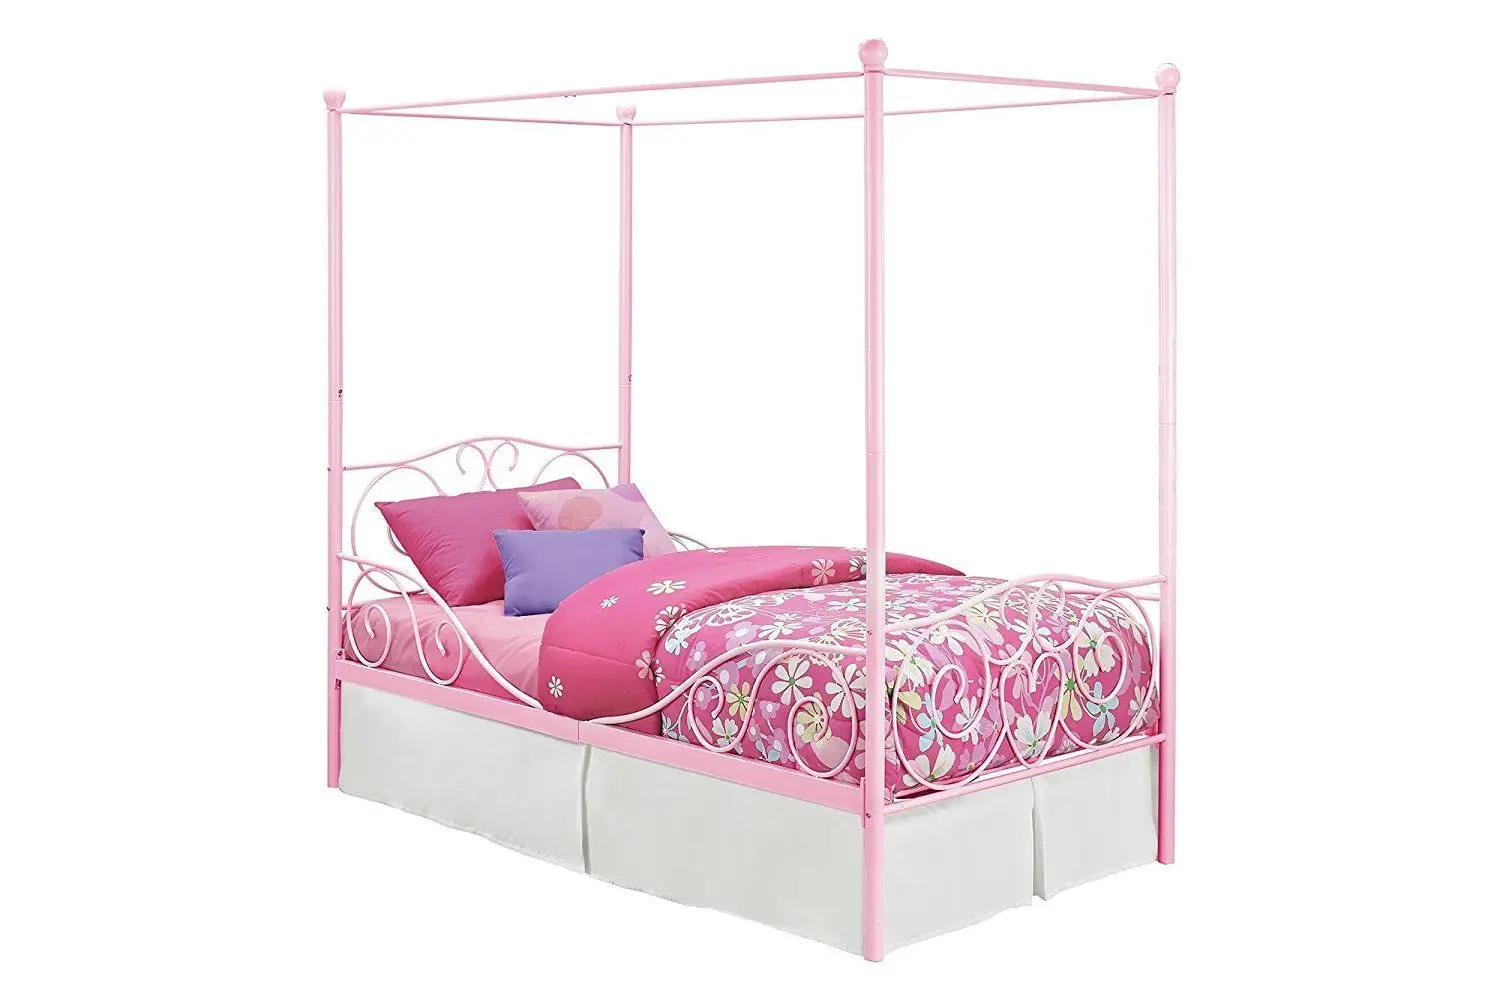 childrens 4 poster bed